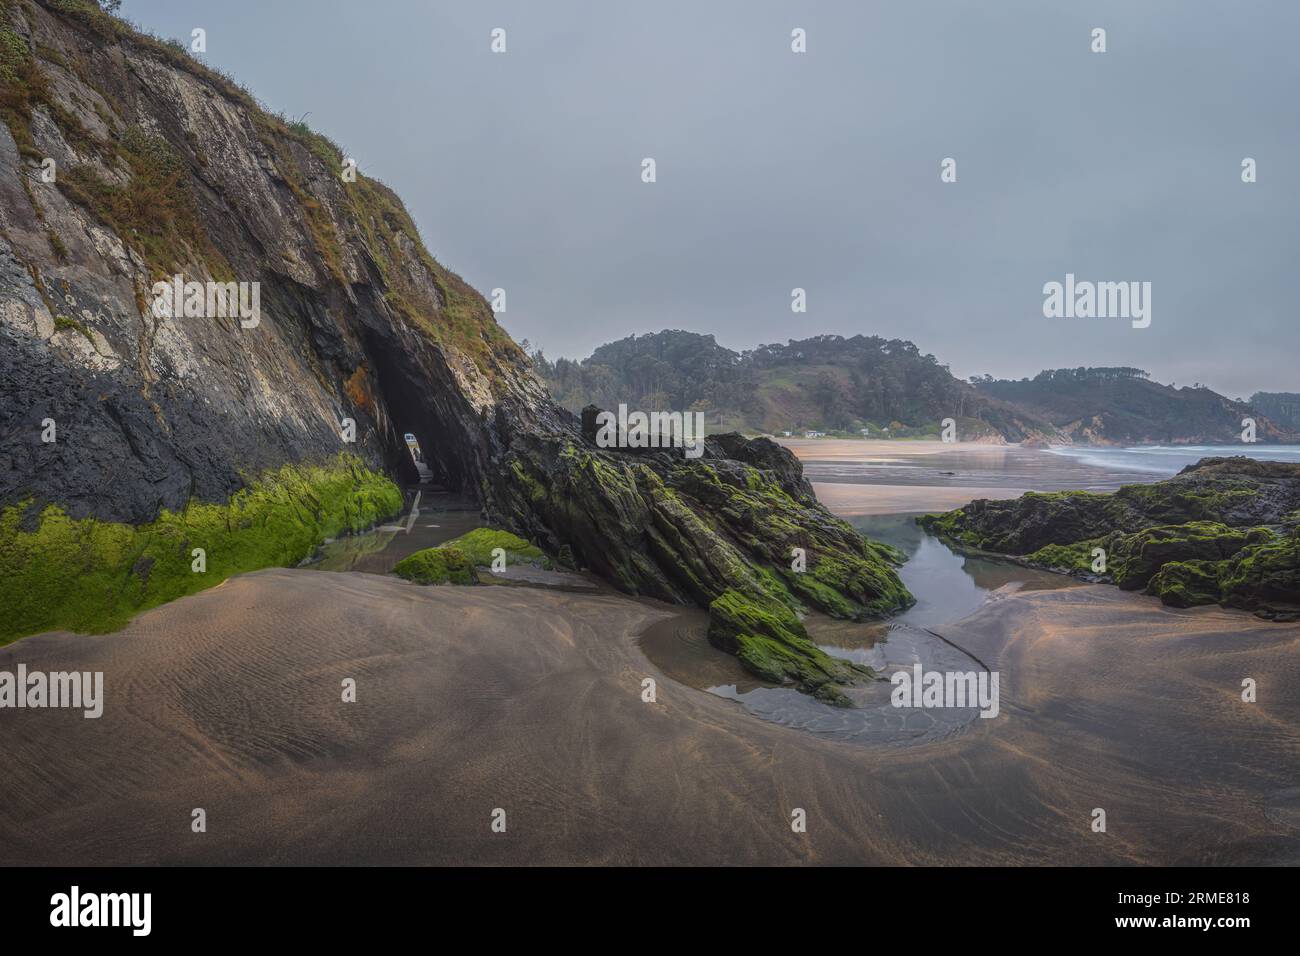 Reflections and moss on the beach of Otur, Asturian coast. Stock Photo